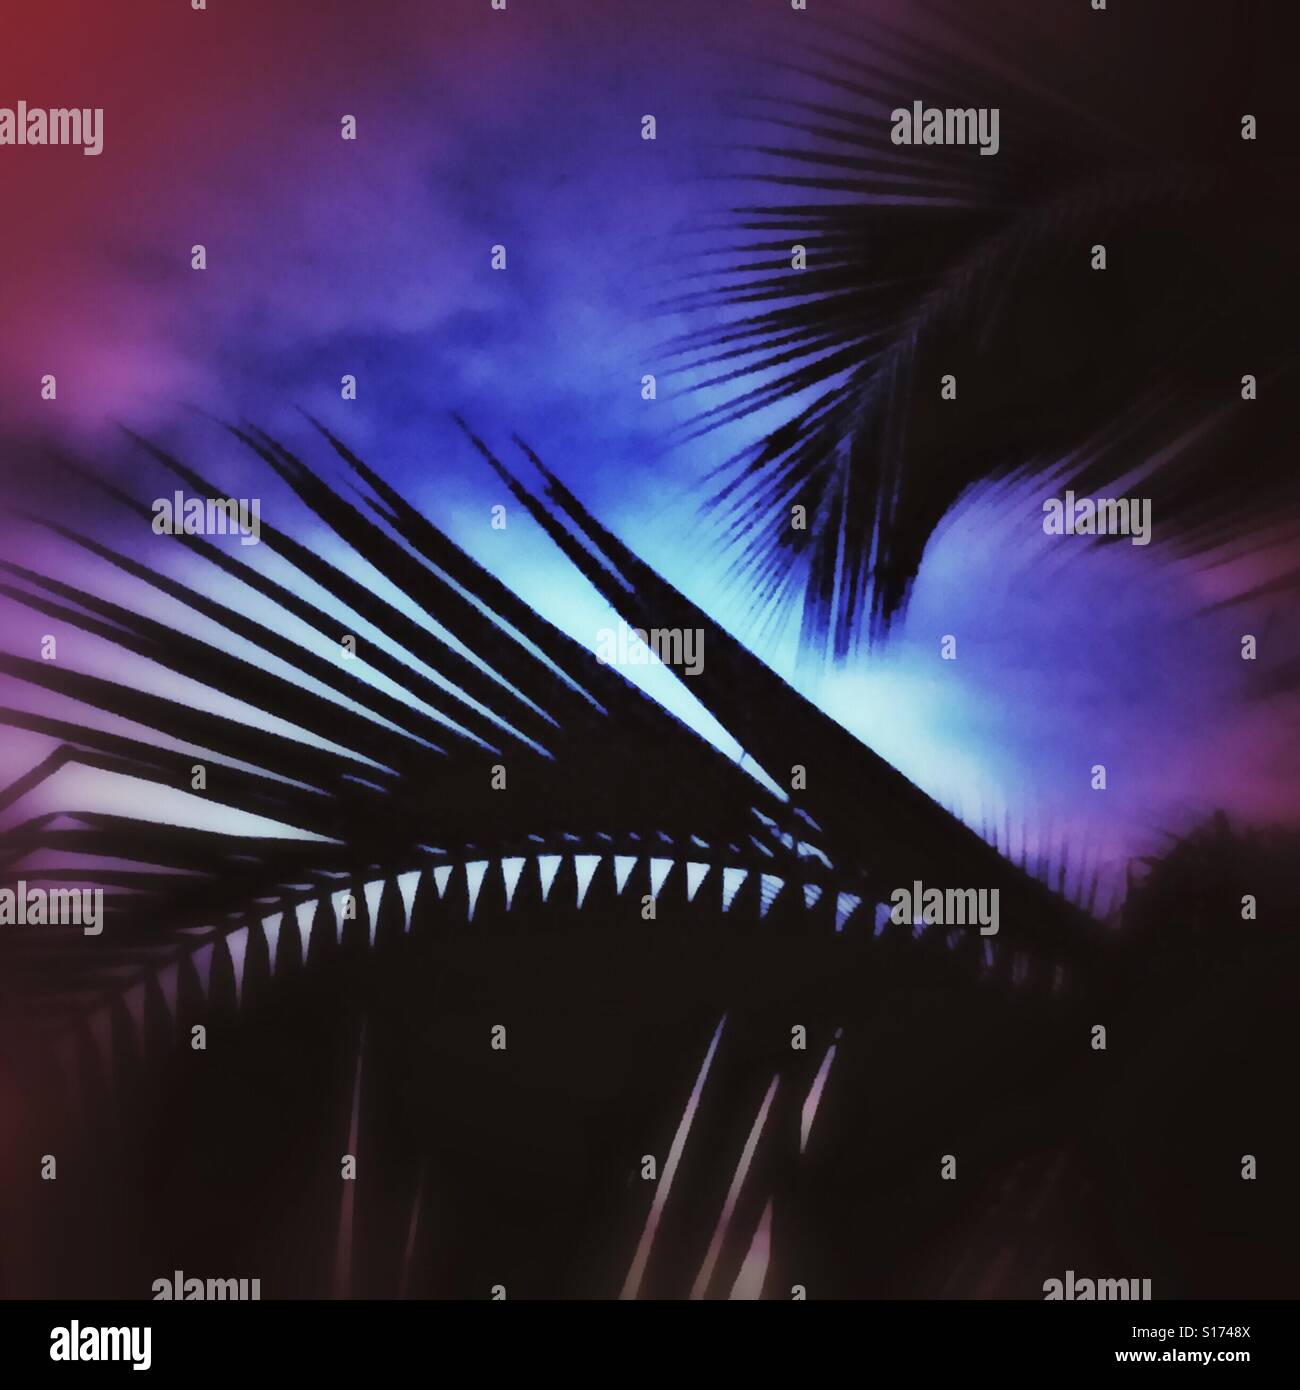 Palm frond silhouettes at twilight. Stock Photo